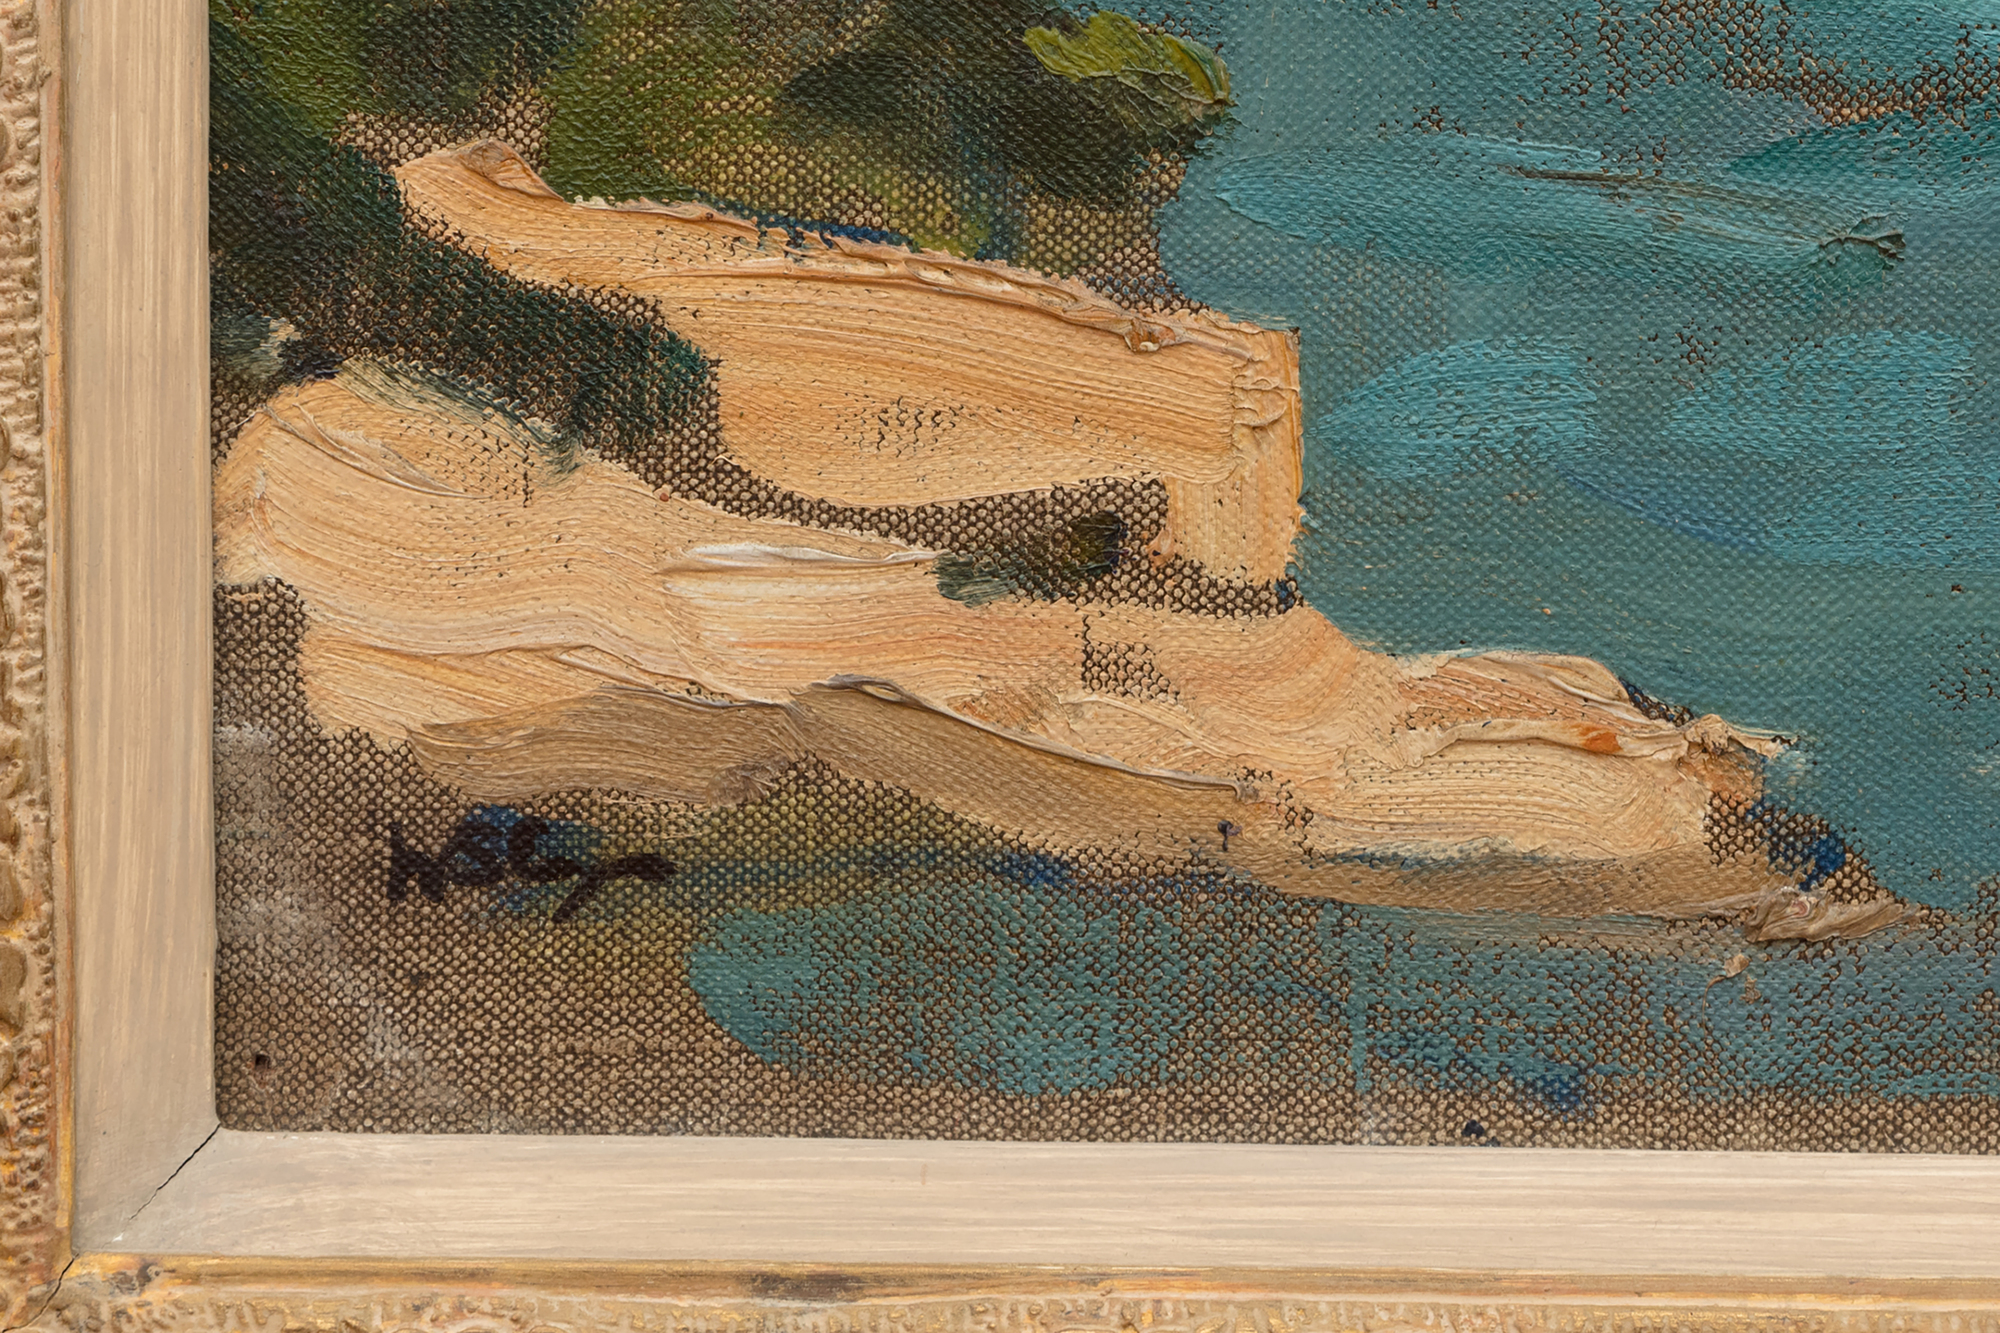 SIR WINSTON CHURCHILL - View Over Cassis Port (C 333) - キャンバスに油彩 - 25 x 30 in.